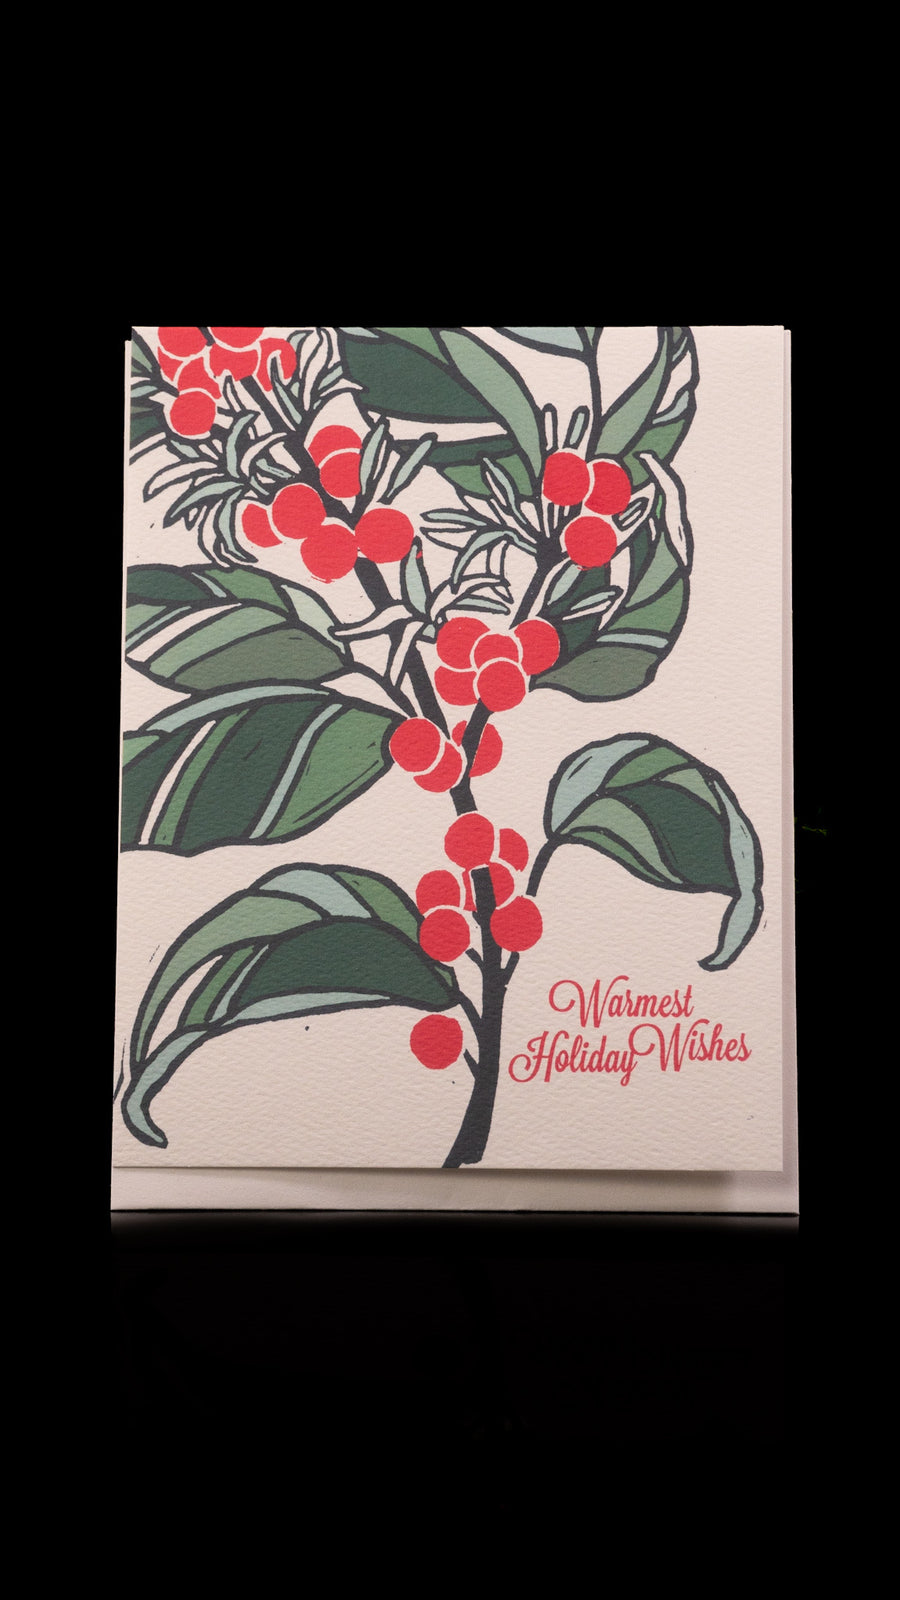 Warmest Holiday Wishes Card by Little Green